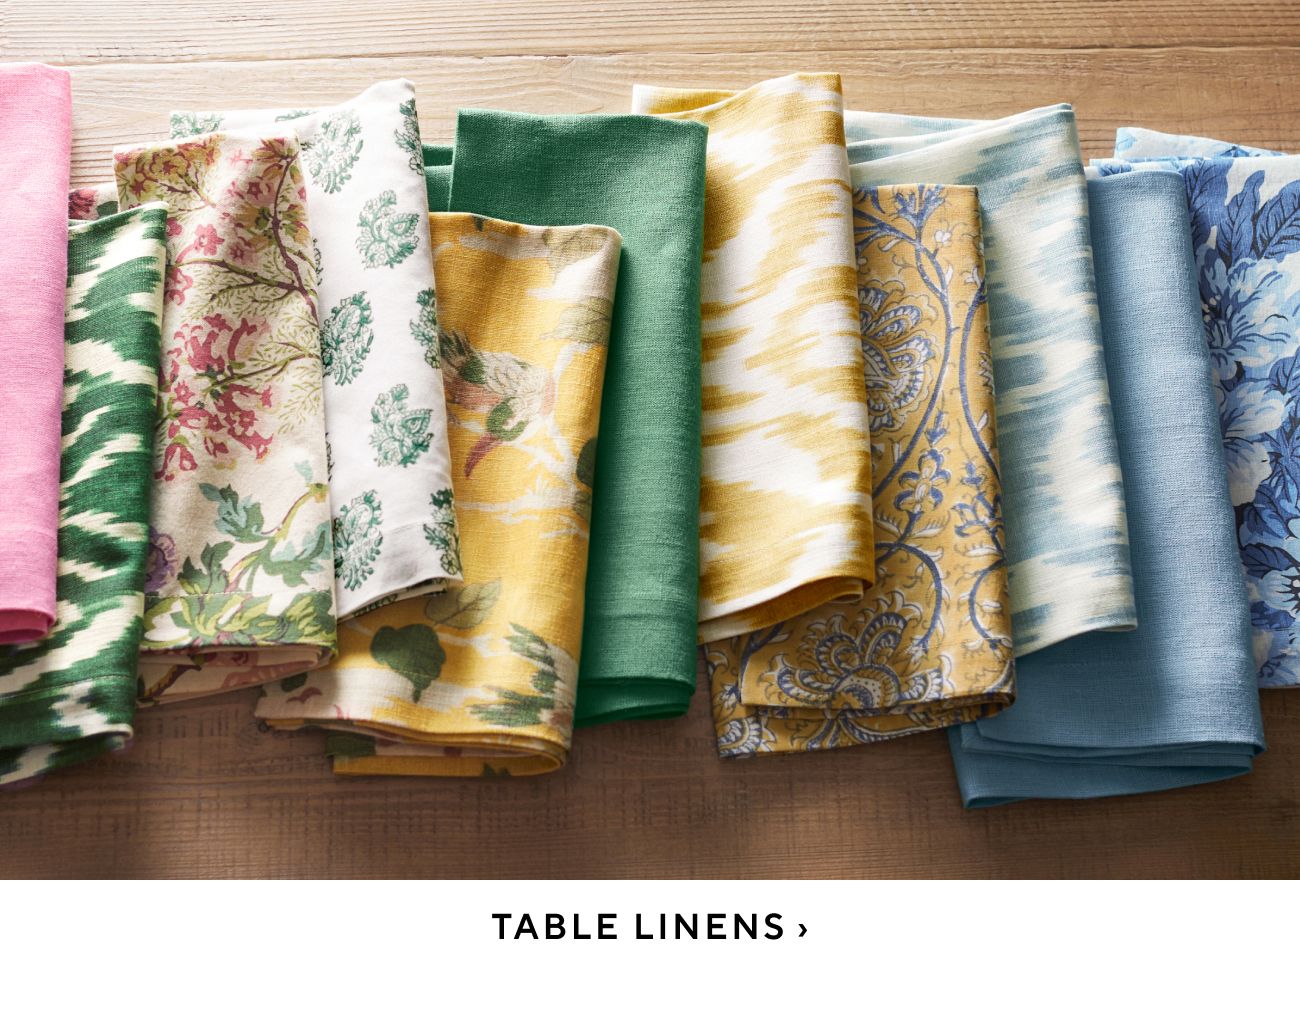  TABLE LINENS 